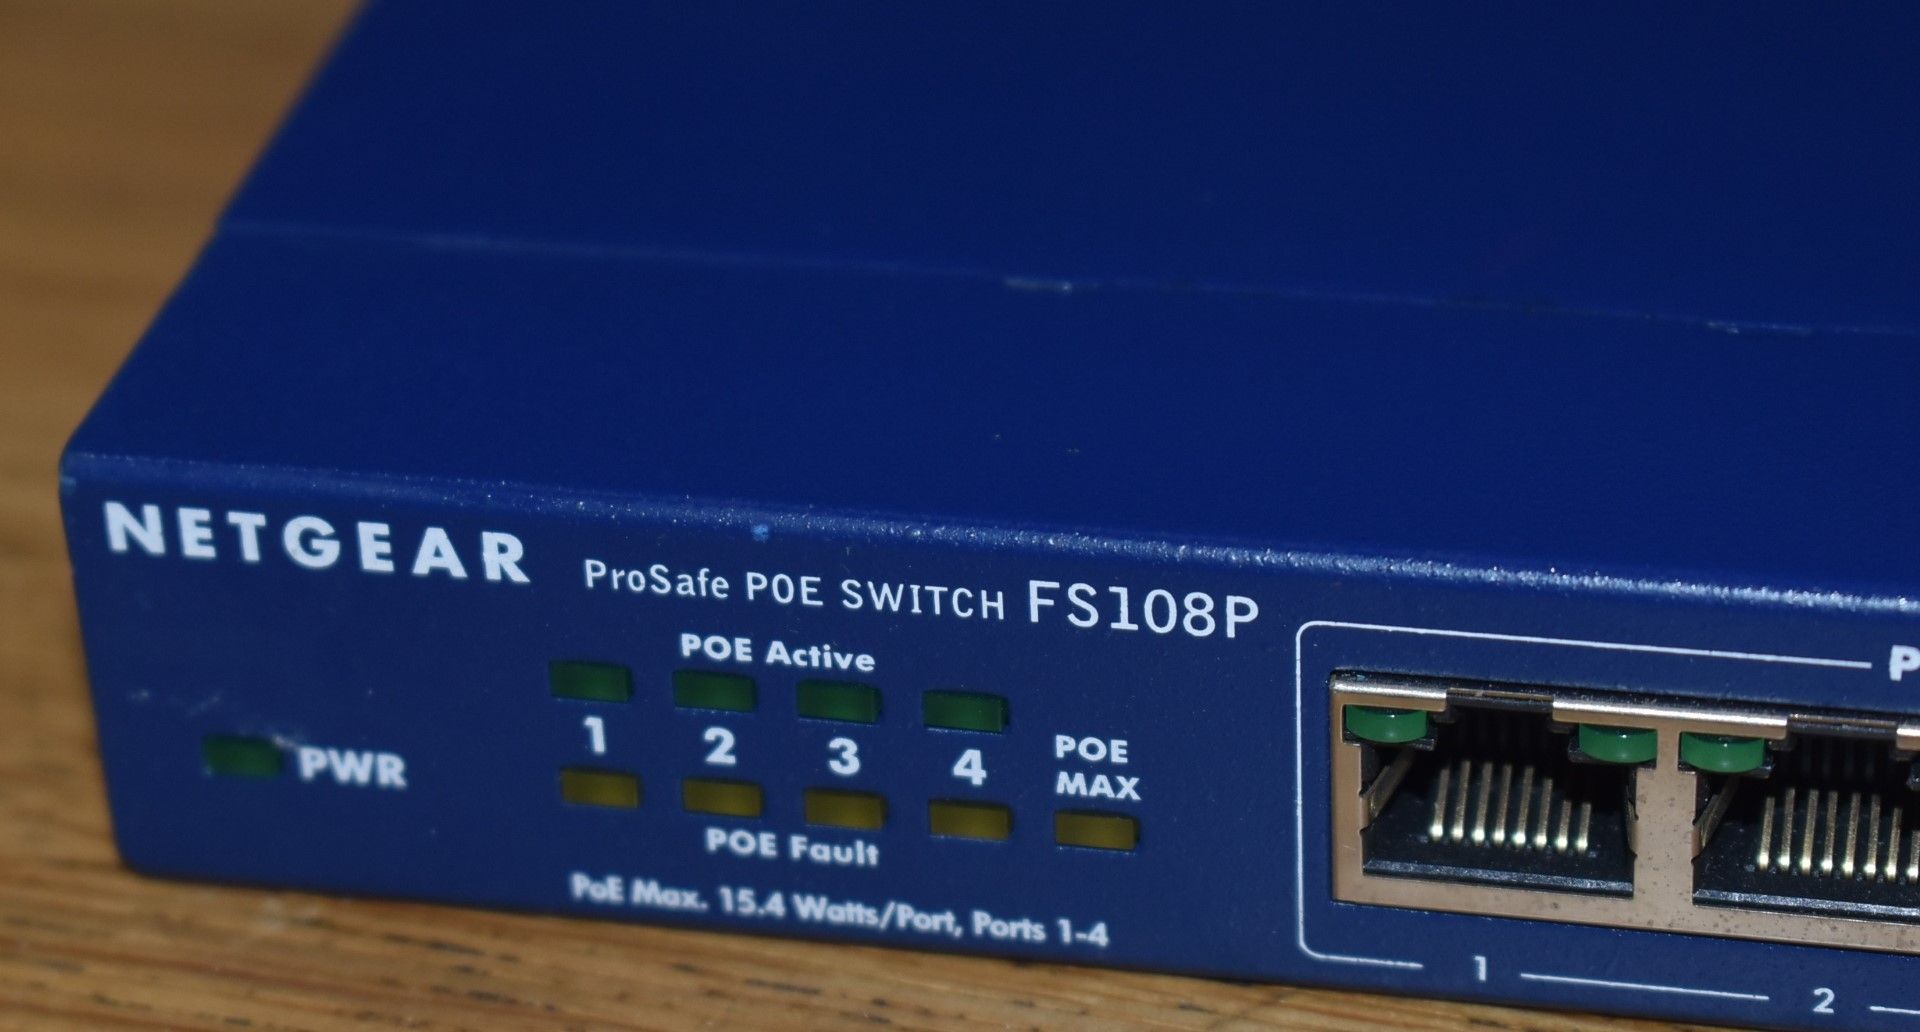 1 x Netgear Prosafe FS108P 8-Port 10/100 Switch with 4-Port POE - Ref: MPC600 WH3  - CL678 - - Image 2 of 5